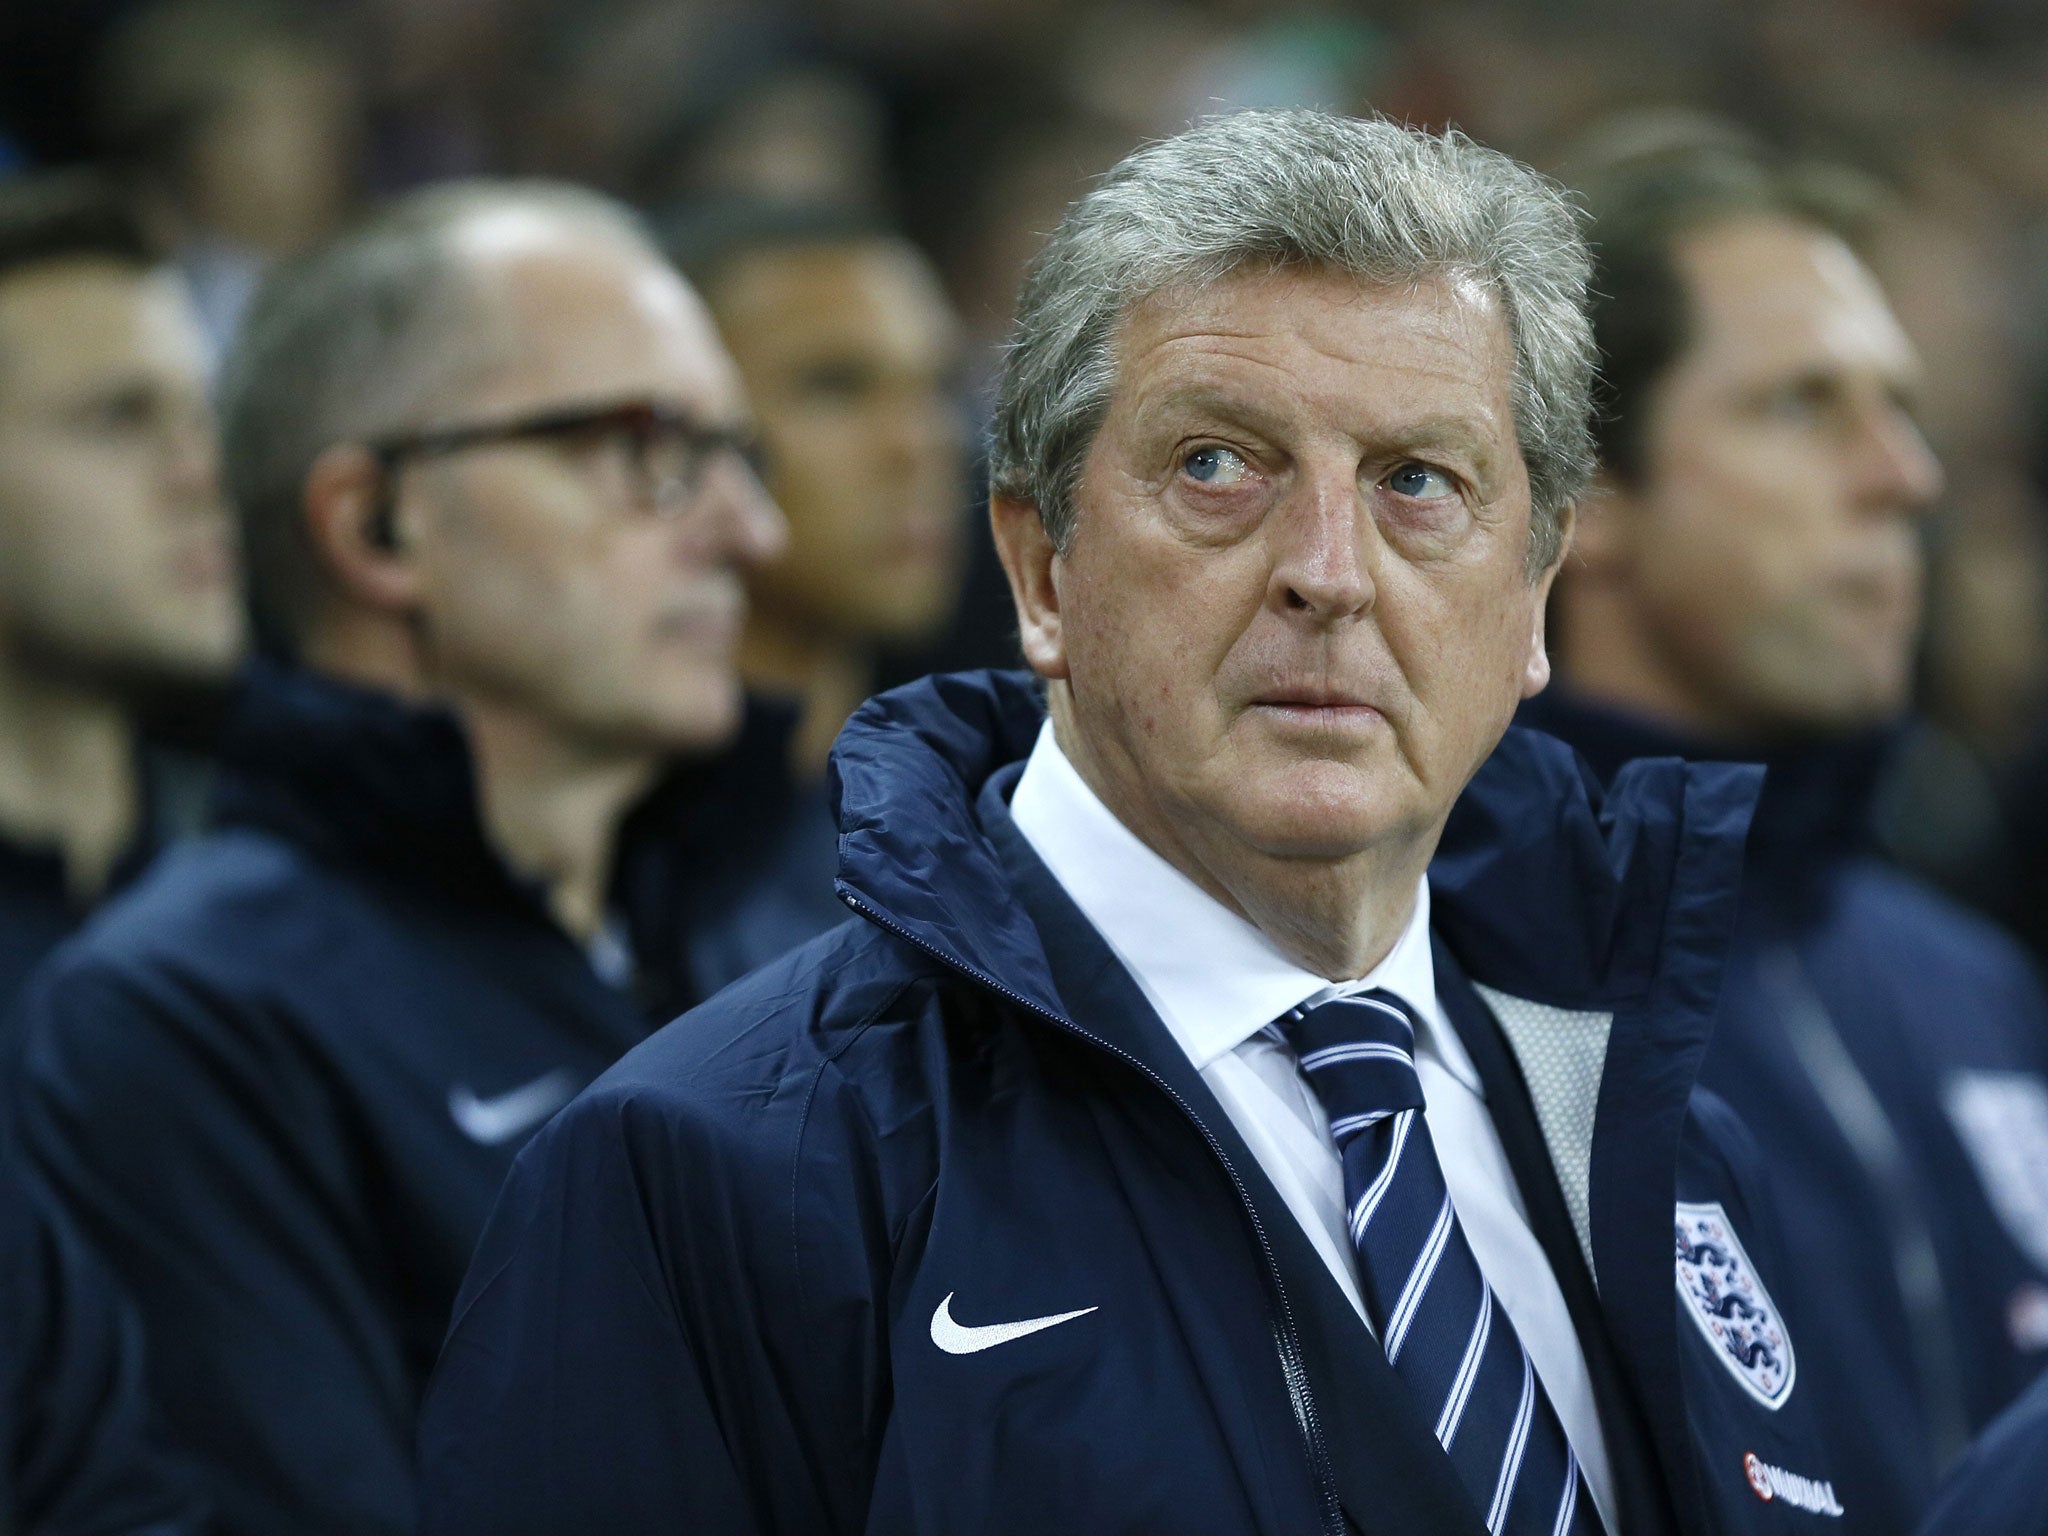 Roy Hodgson will have been distressed by accusations of racism